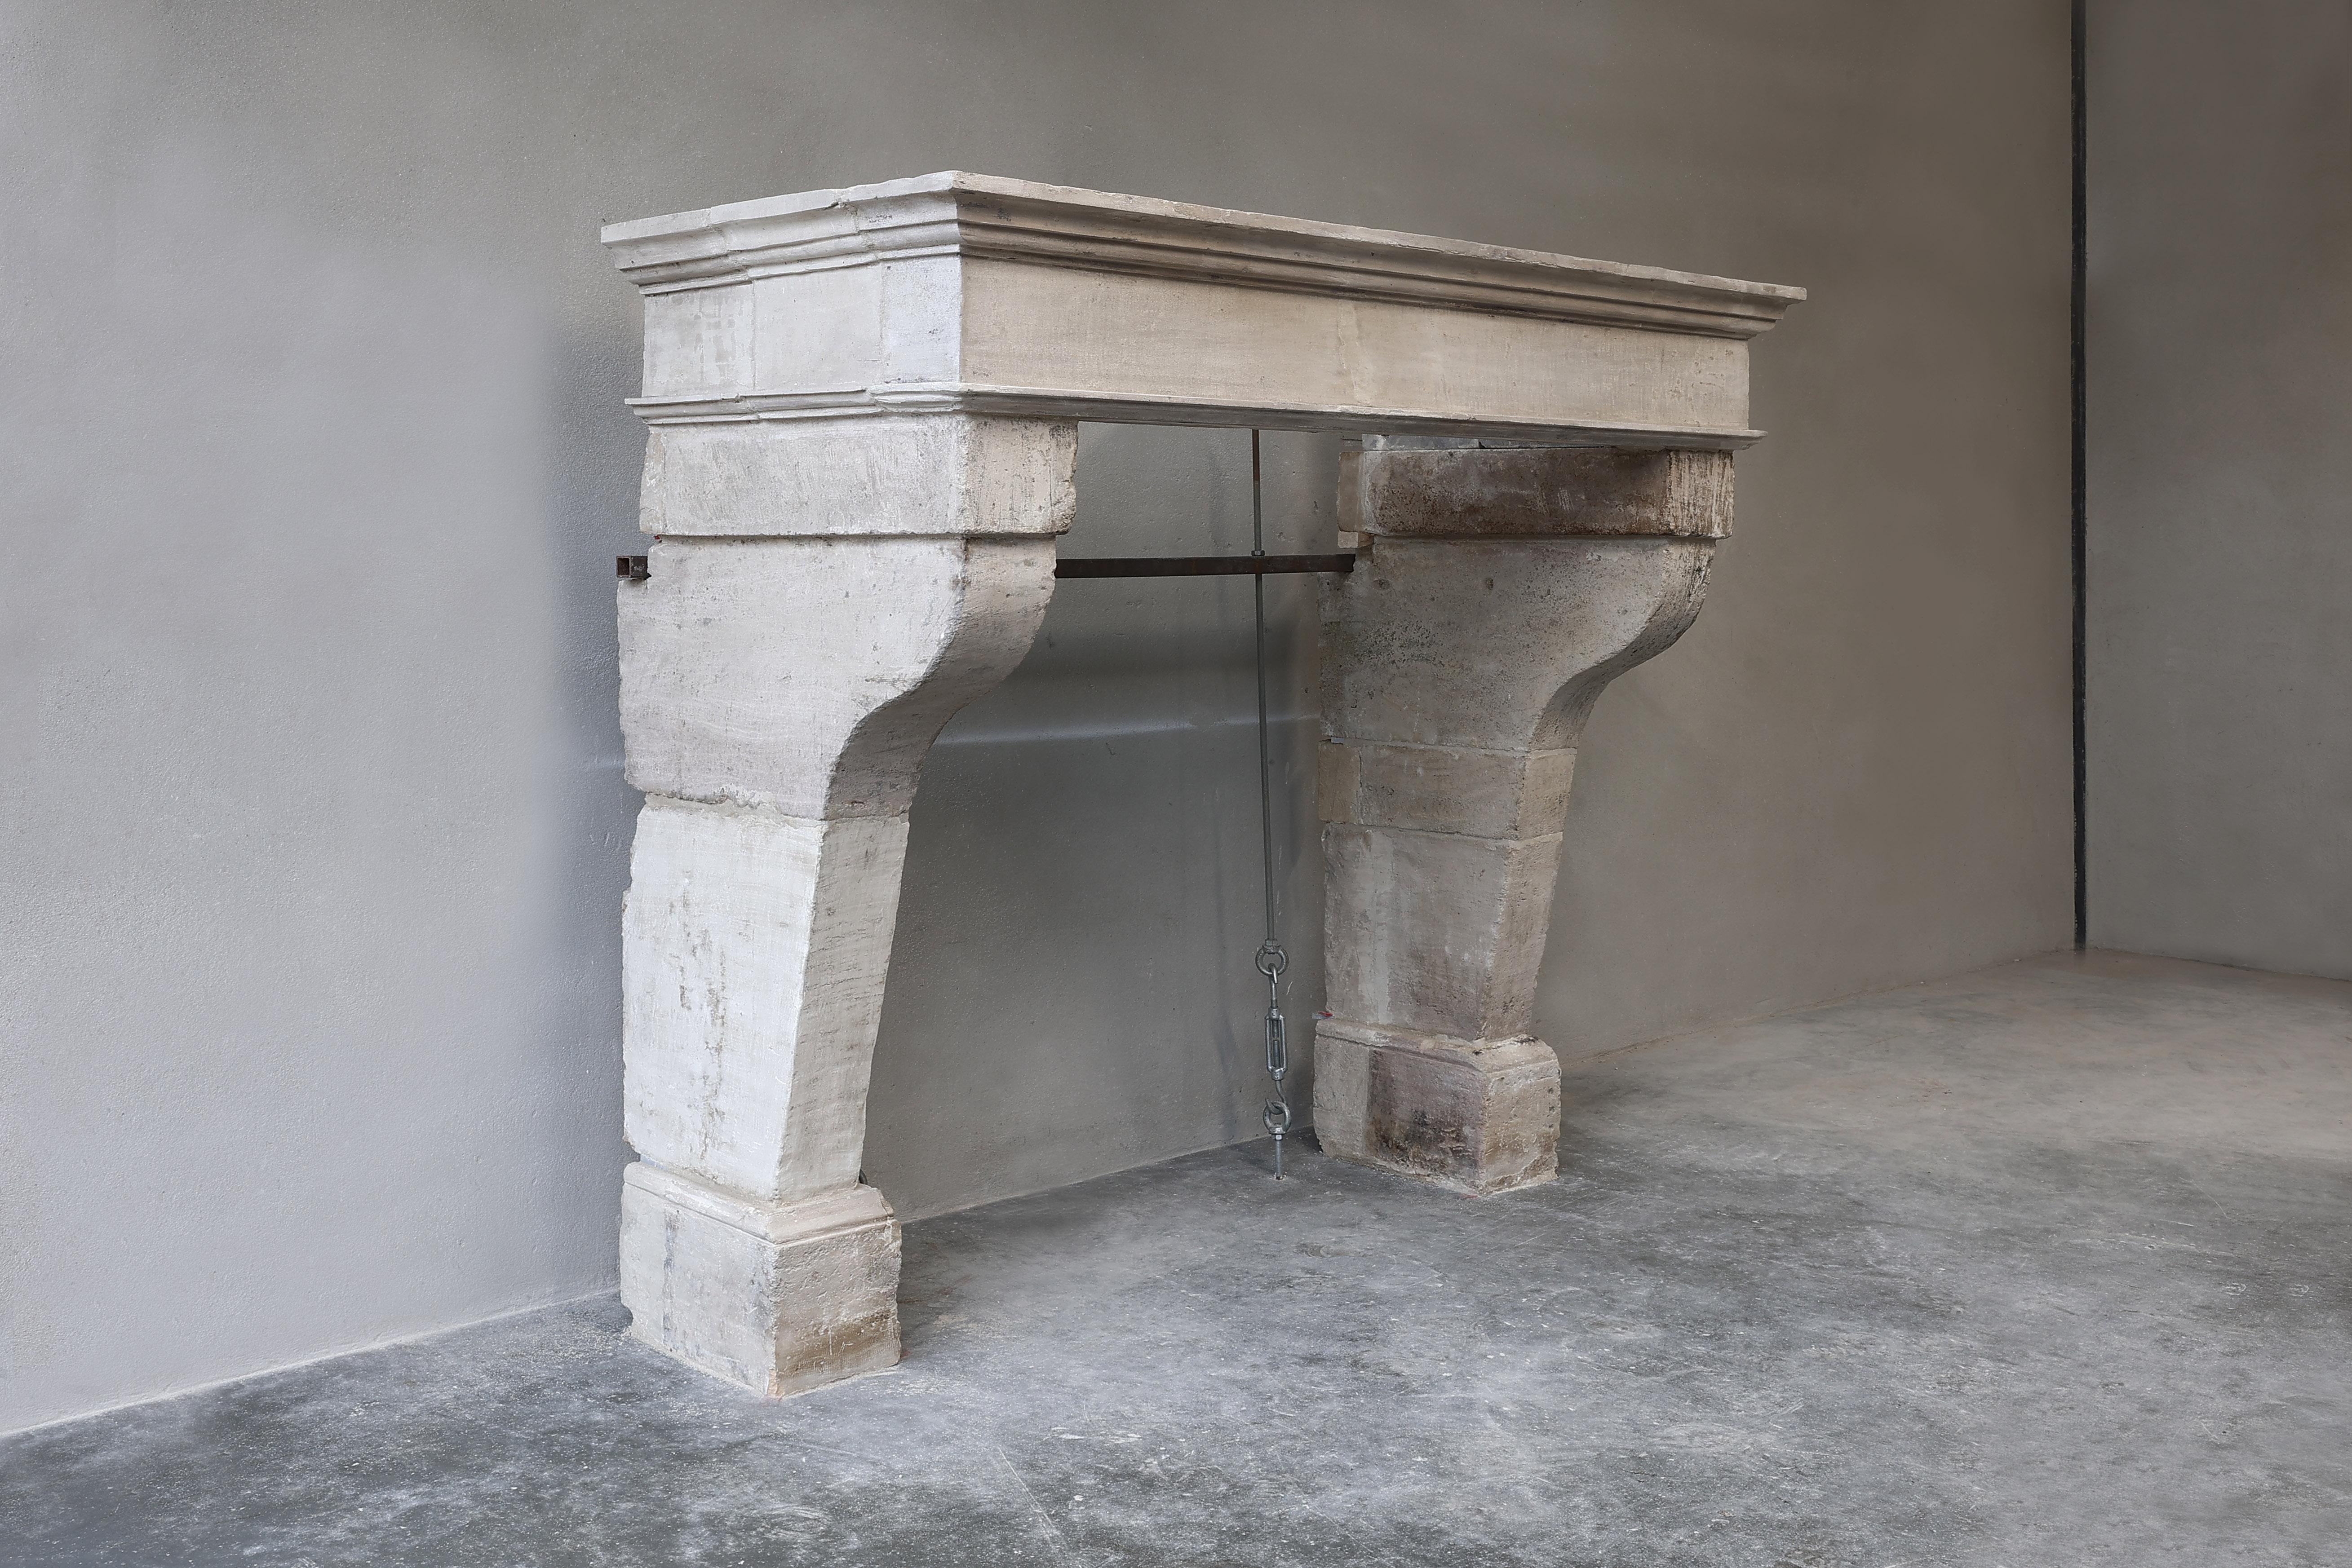 Beautiful rustic antique fireplace of 19th century French limestone. This chimney has a nice size, which makes it look good in many interiors. The rural appearance and moldings give the fireplace even more allure!